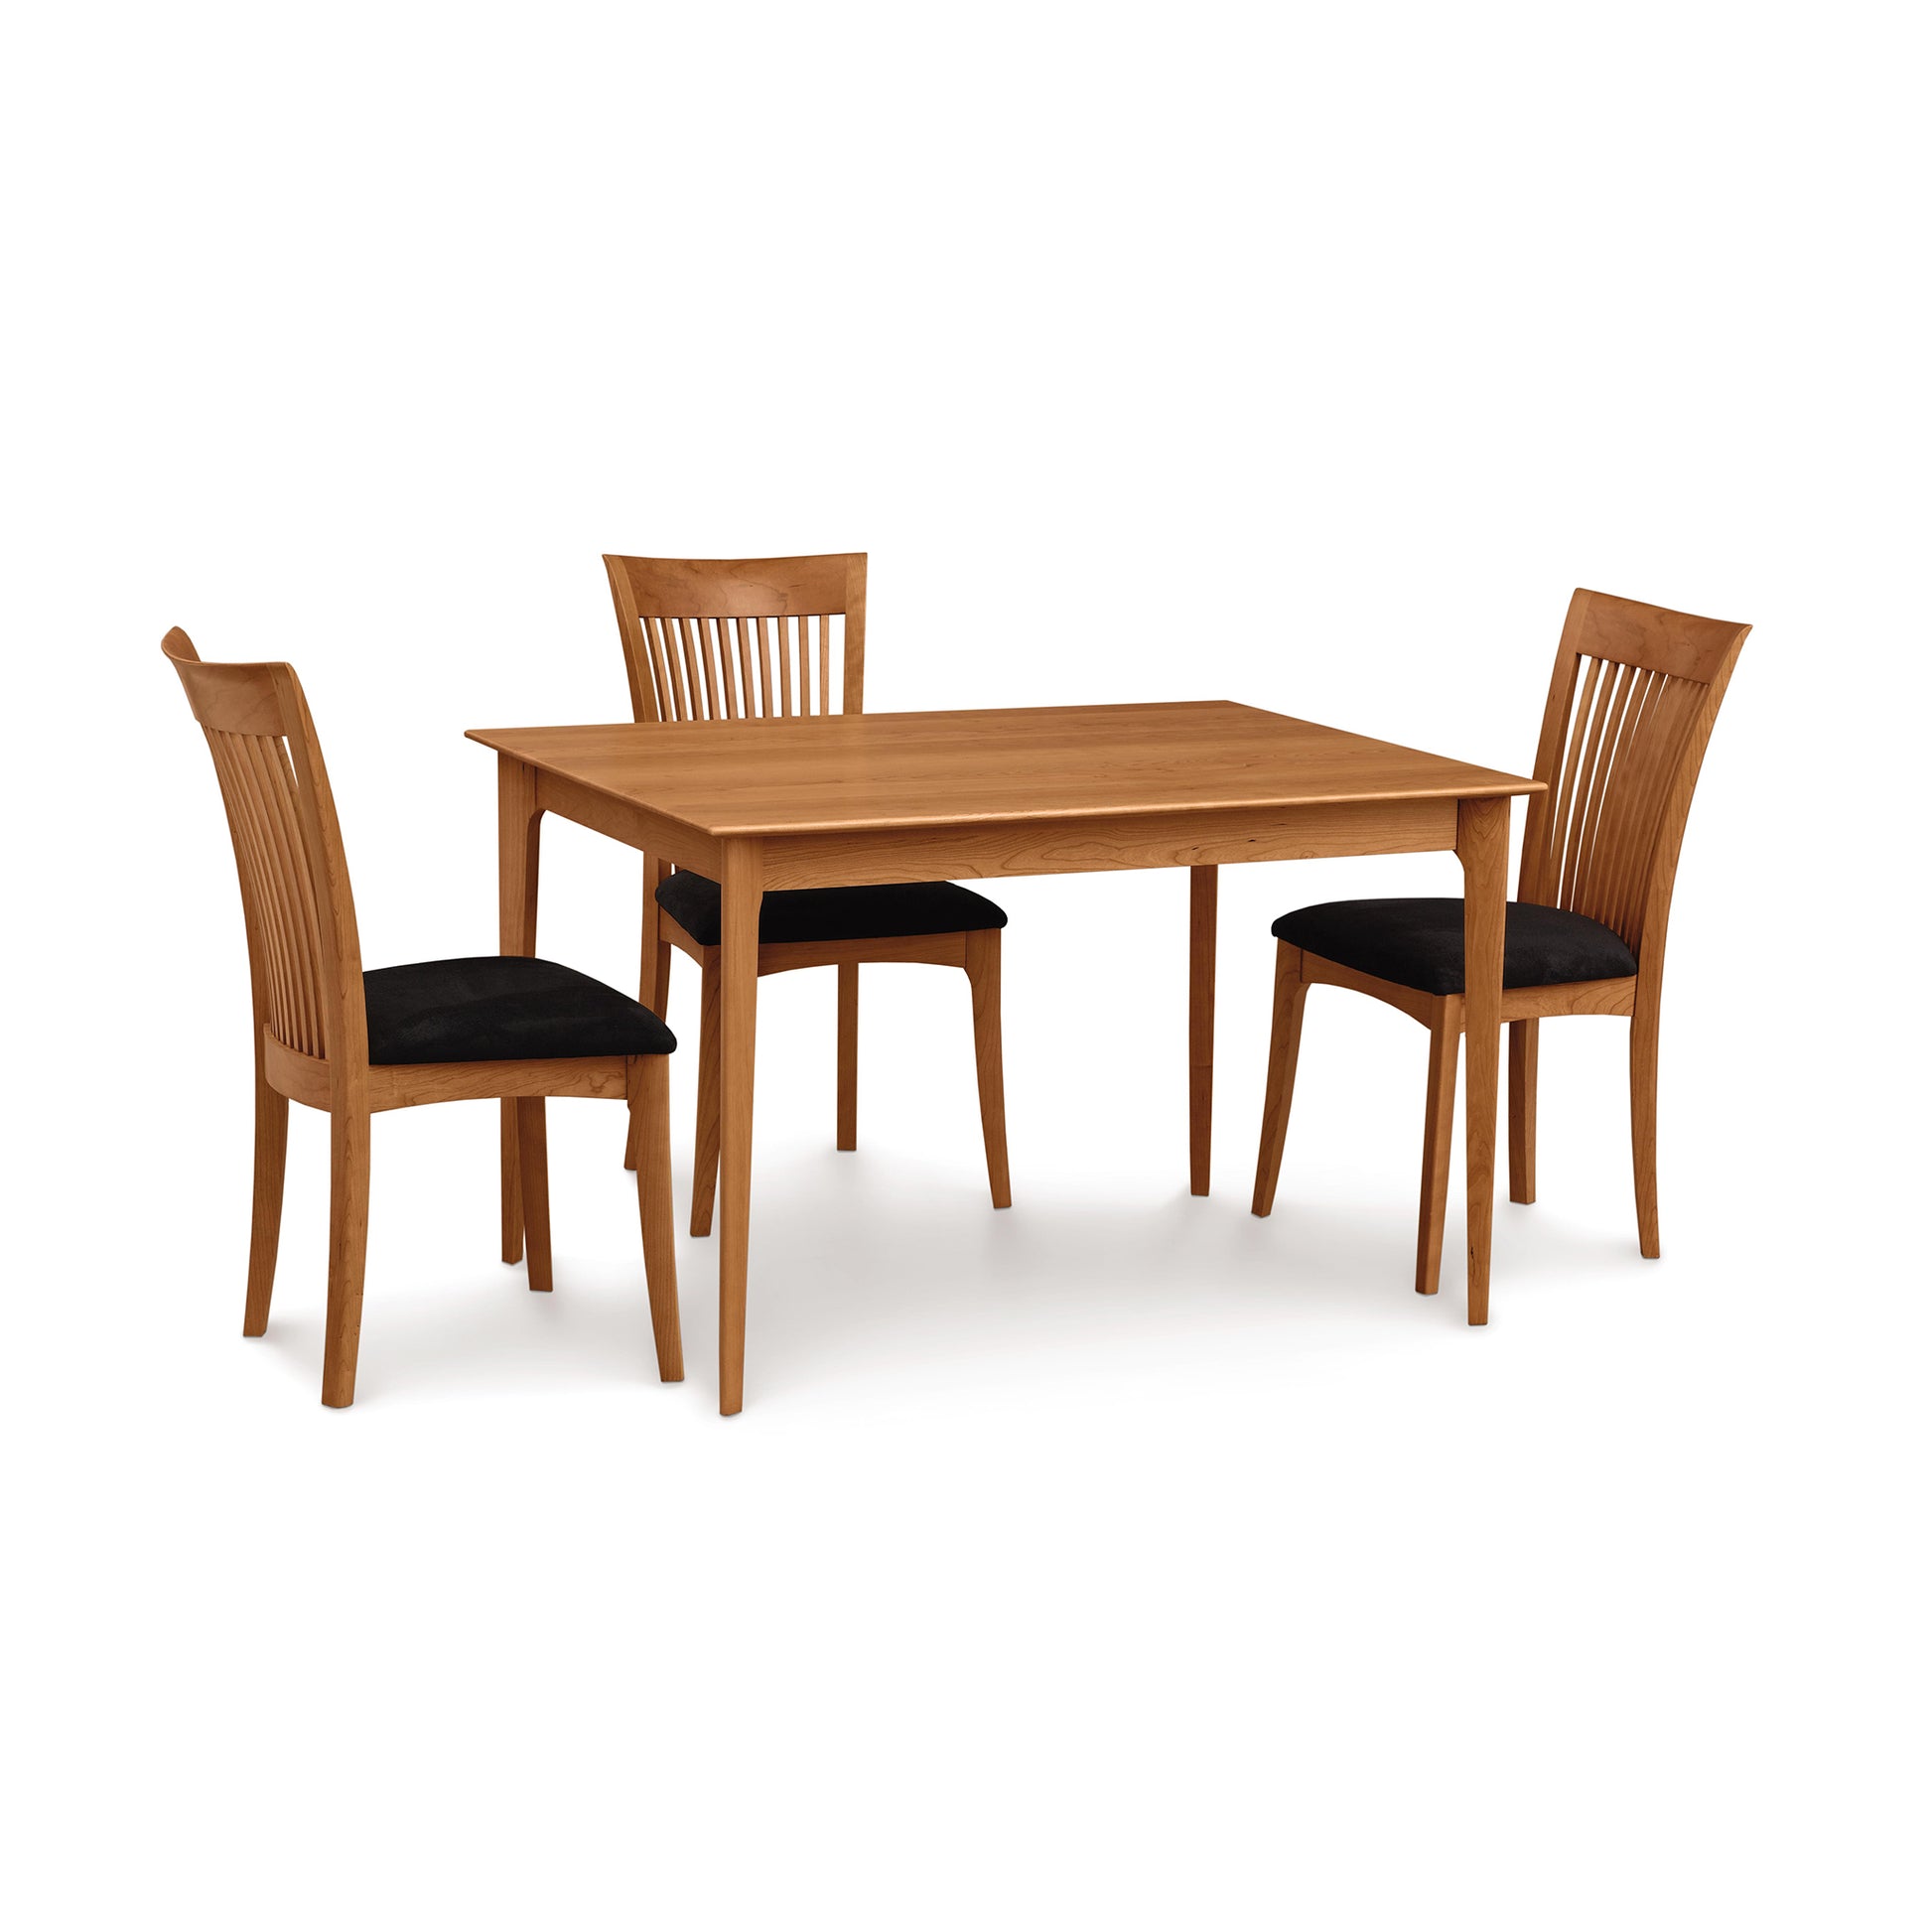 A solid cherry dining table with four matching chairs set on a white background, from the Copeland Furniture Sarah Shaker collection. The chairs have black cushions.